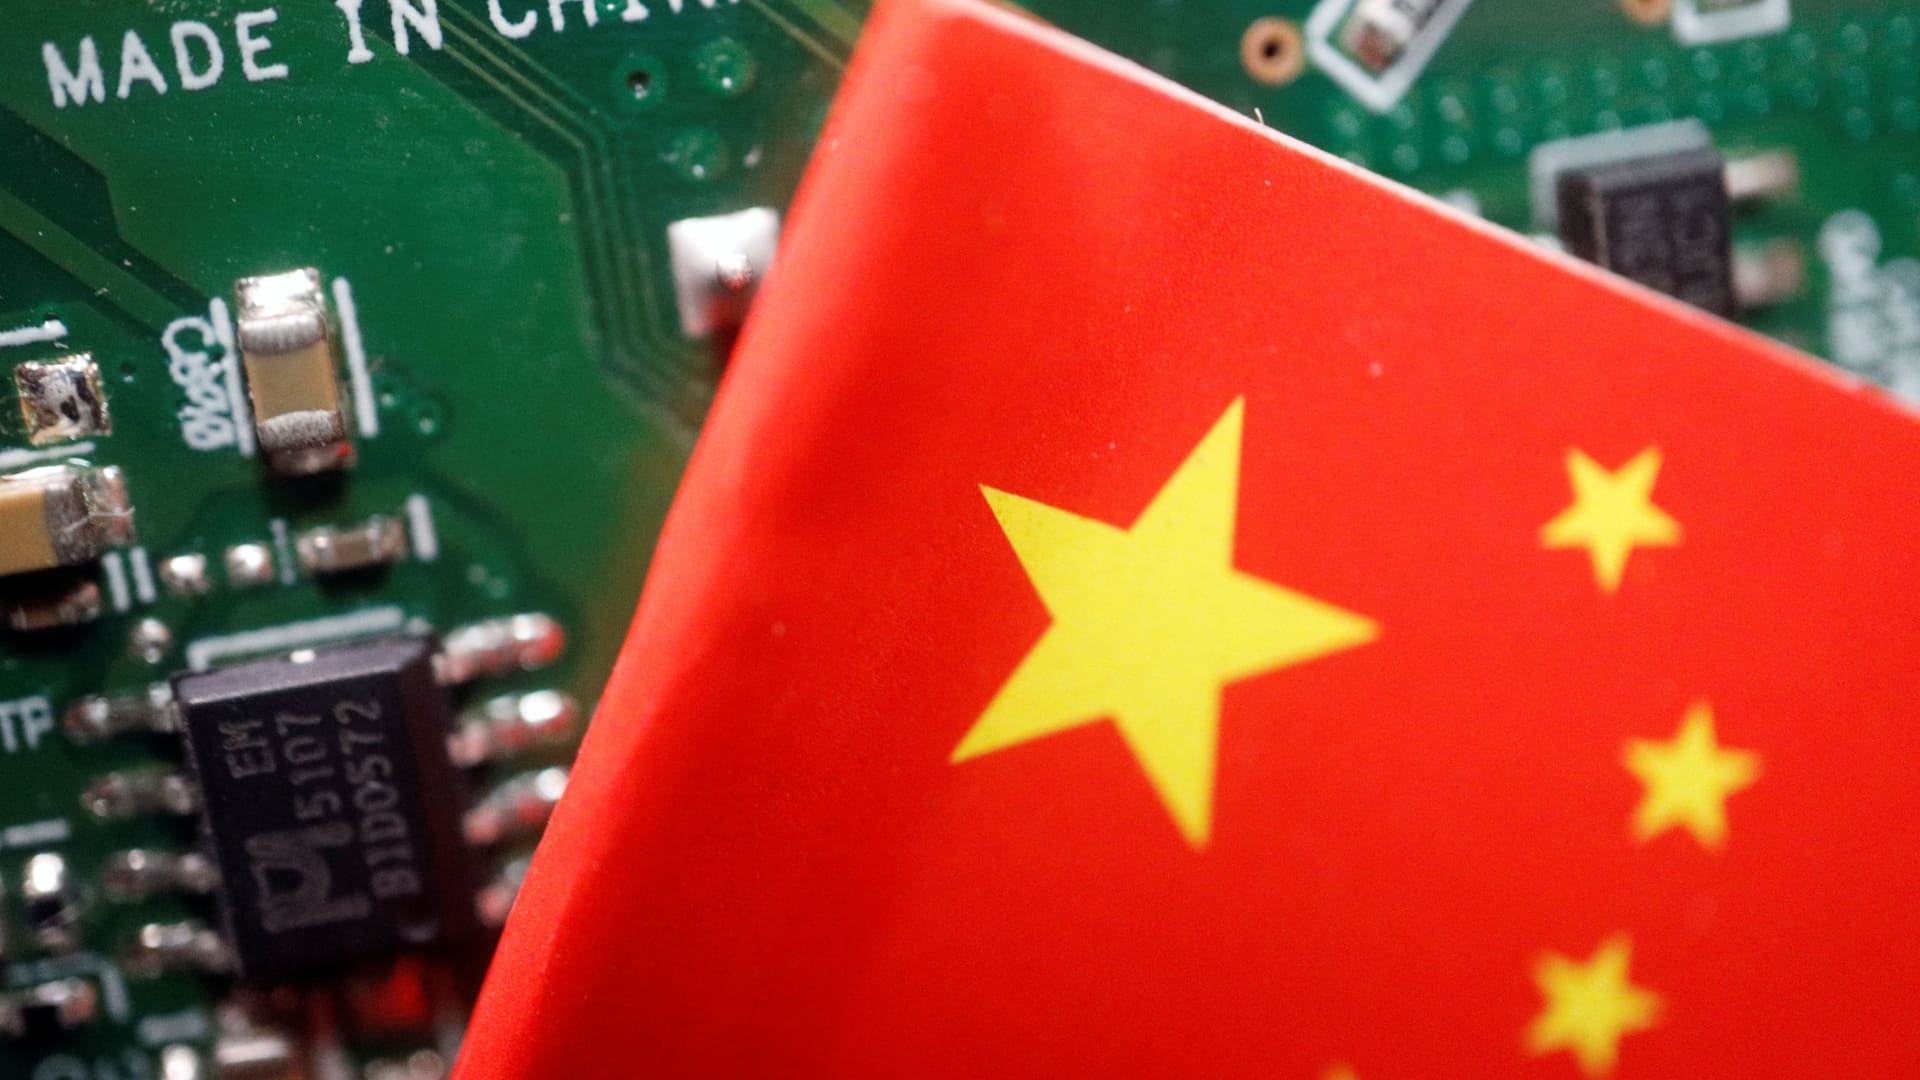 China's chip equipment firms see revenue surge as Beijing seeks semiconductor self-reliance